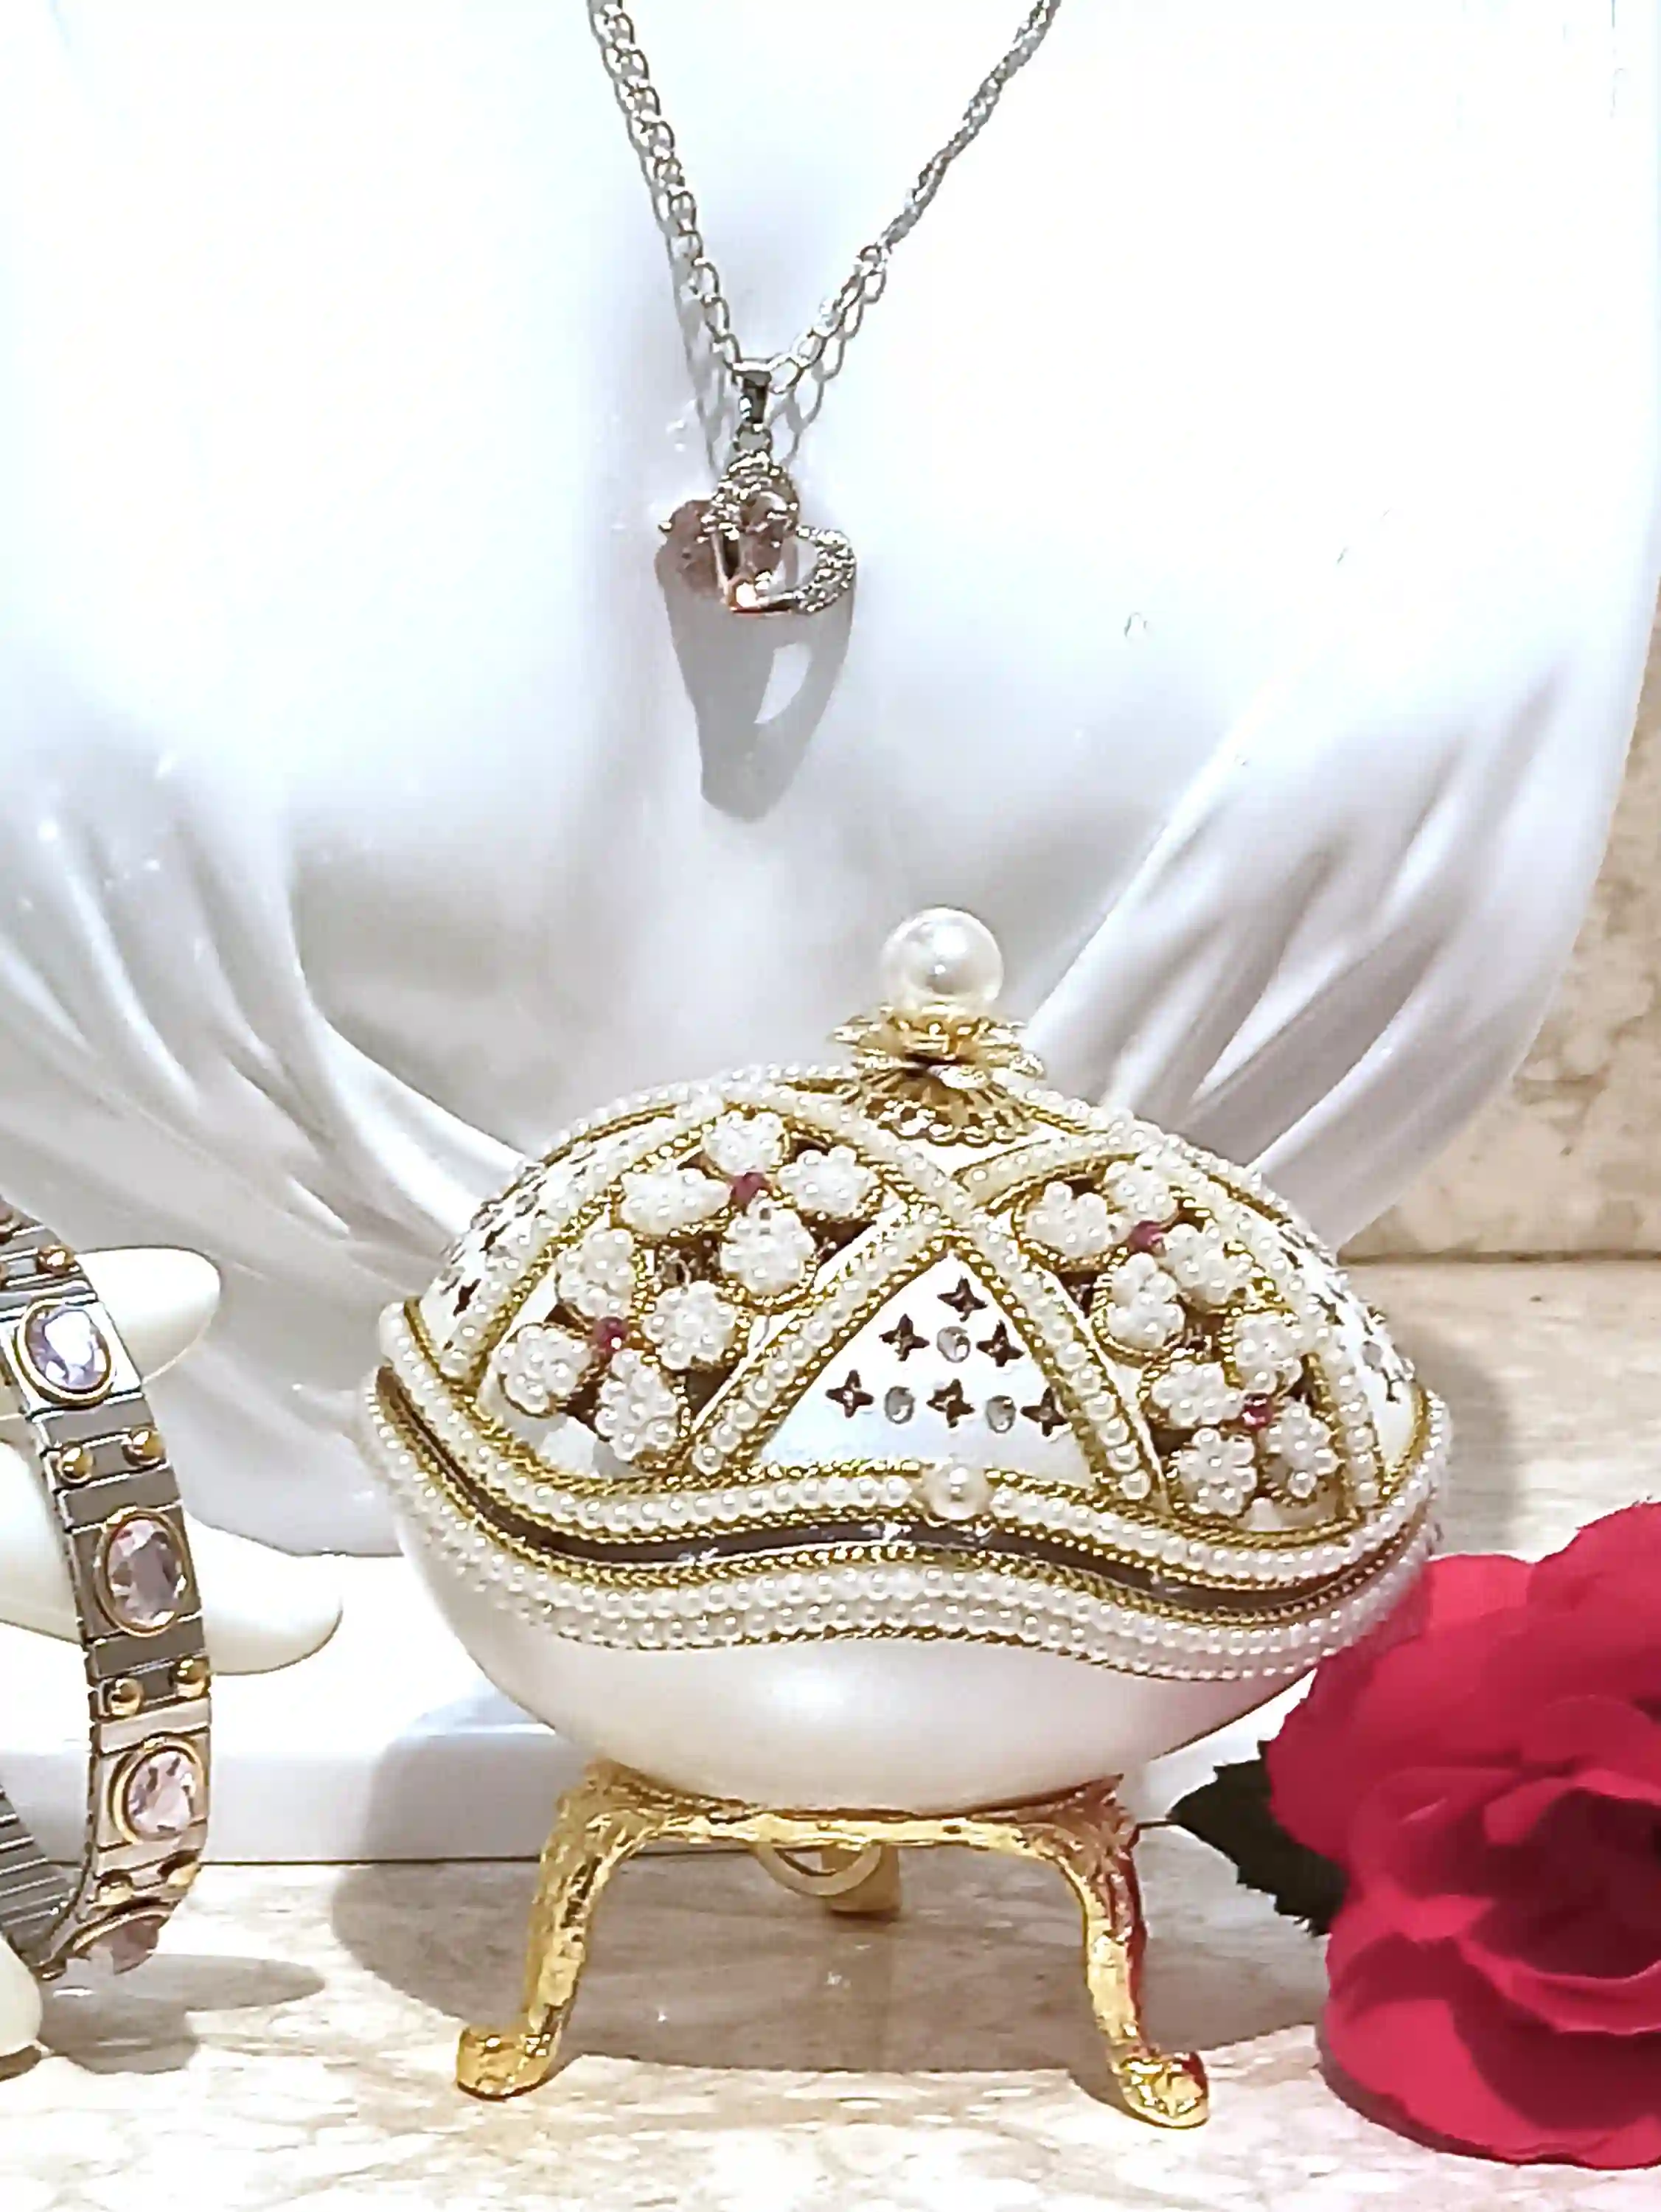 Sweet Birthday Gift for Her Pink FABERGE Egg Musical Jewelry box, Faberge Pendant HEART Necklace Silver Bracelet Pink Topaz Faberge Egg SET 